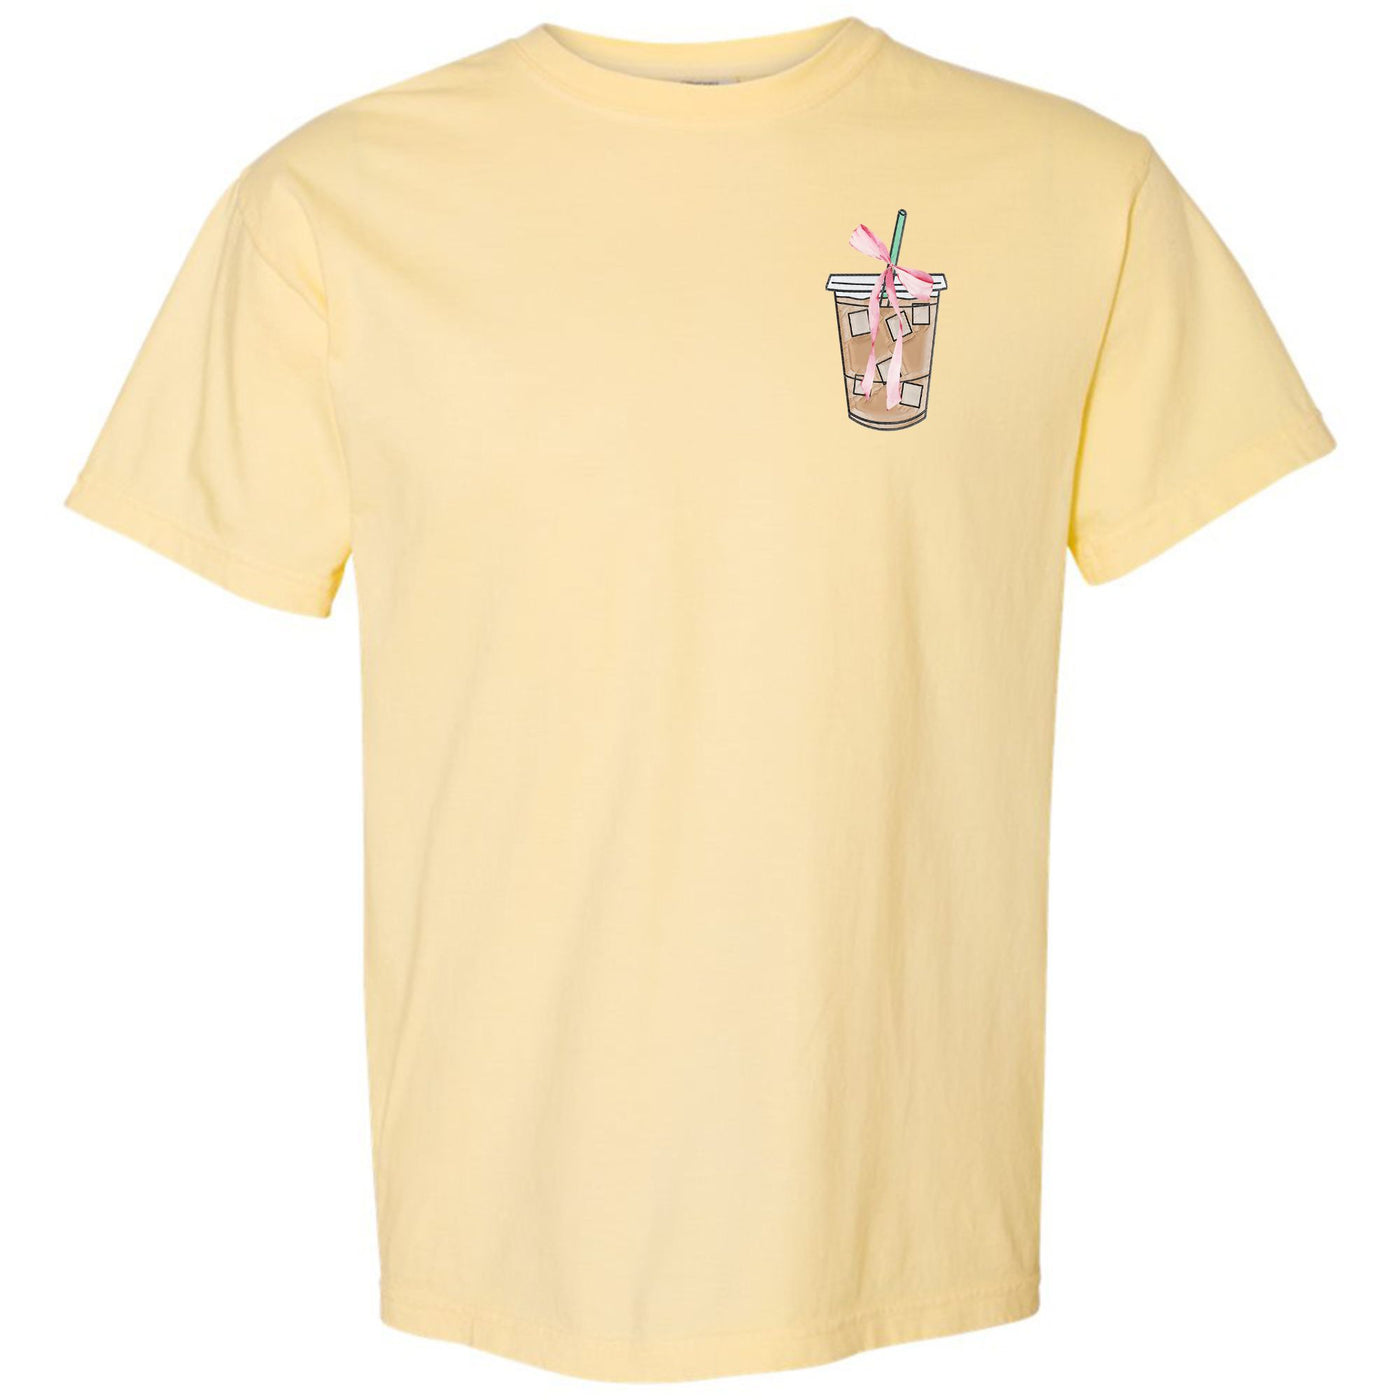 Make It Yours™ 'Bow Beverages' T-Shirt